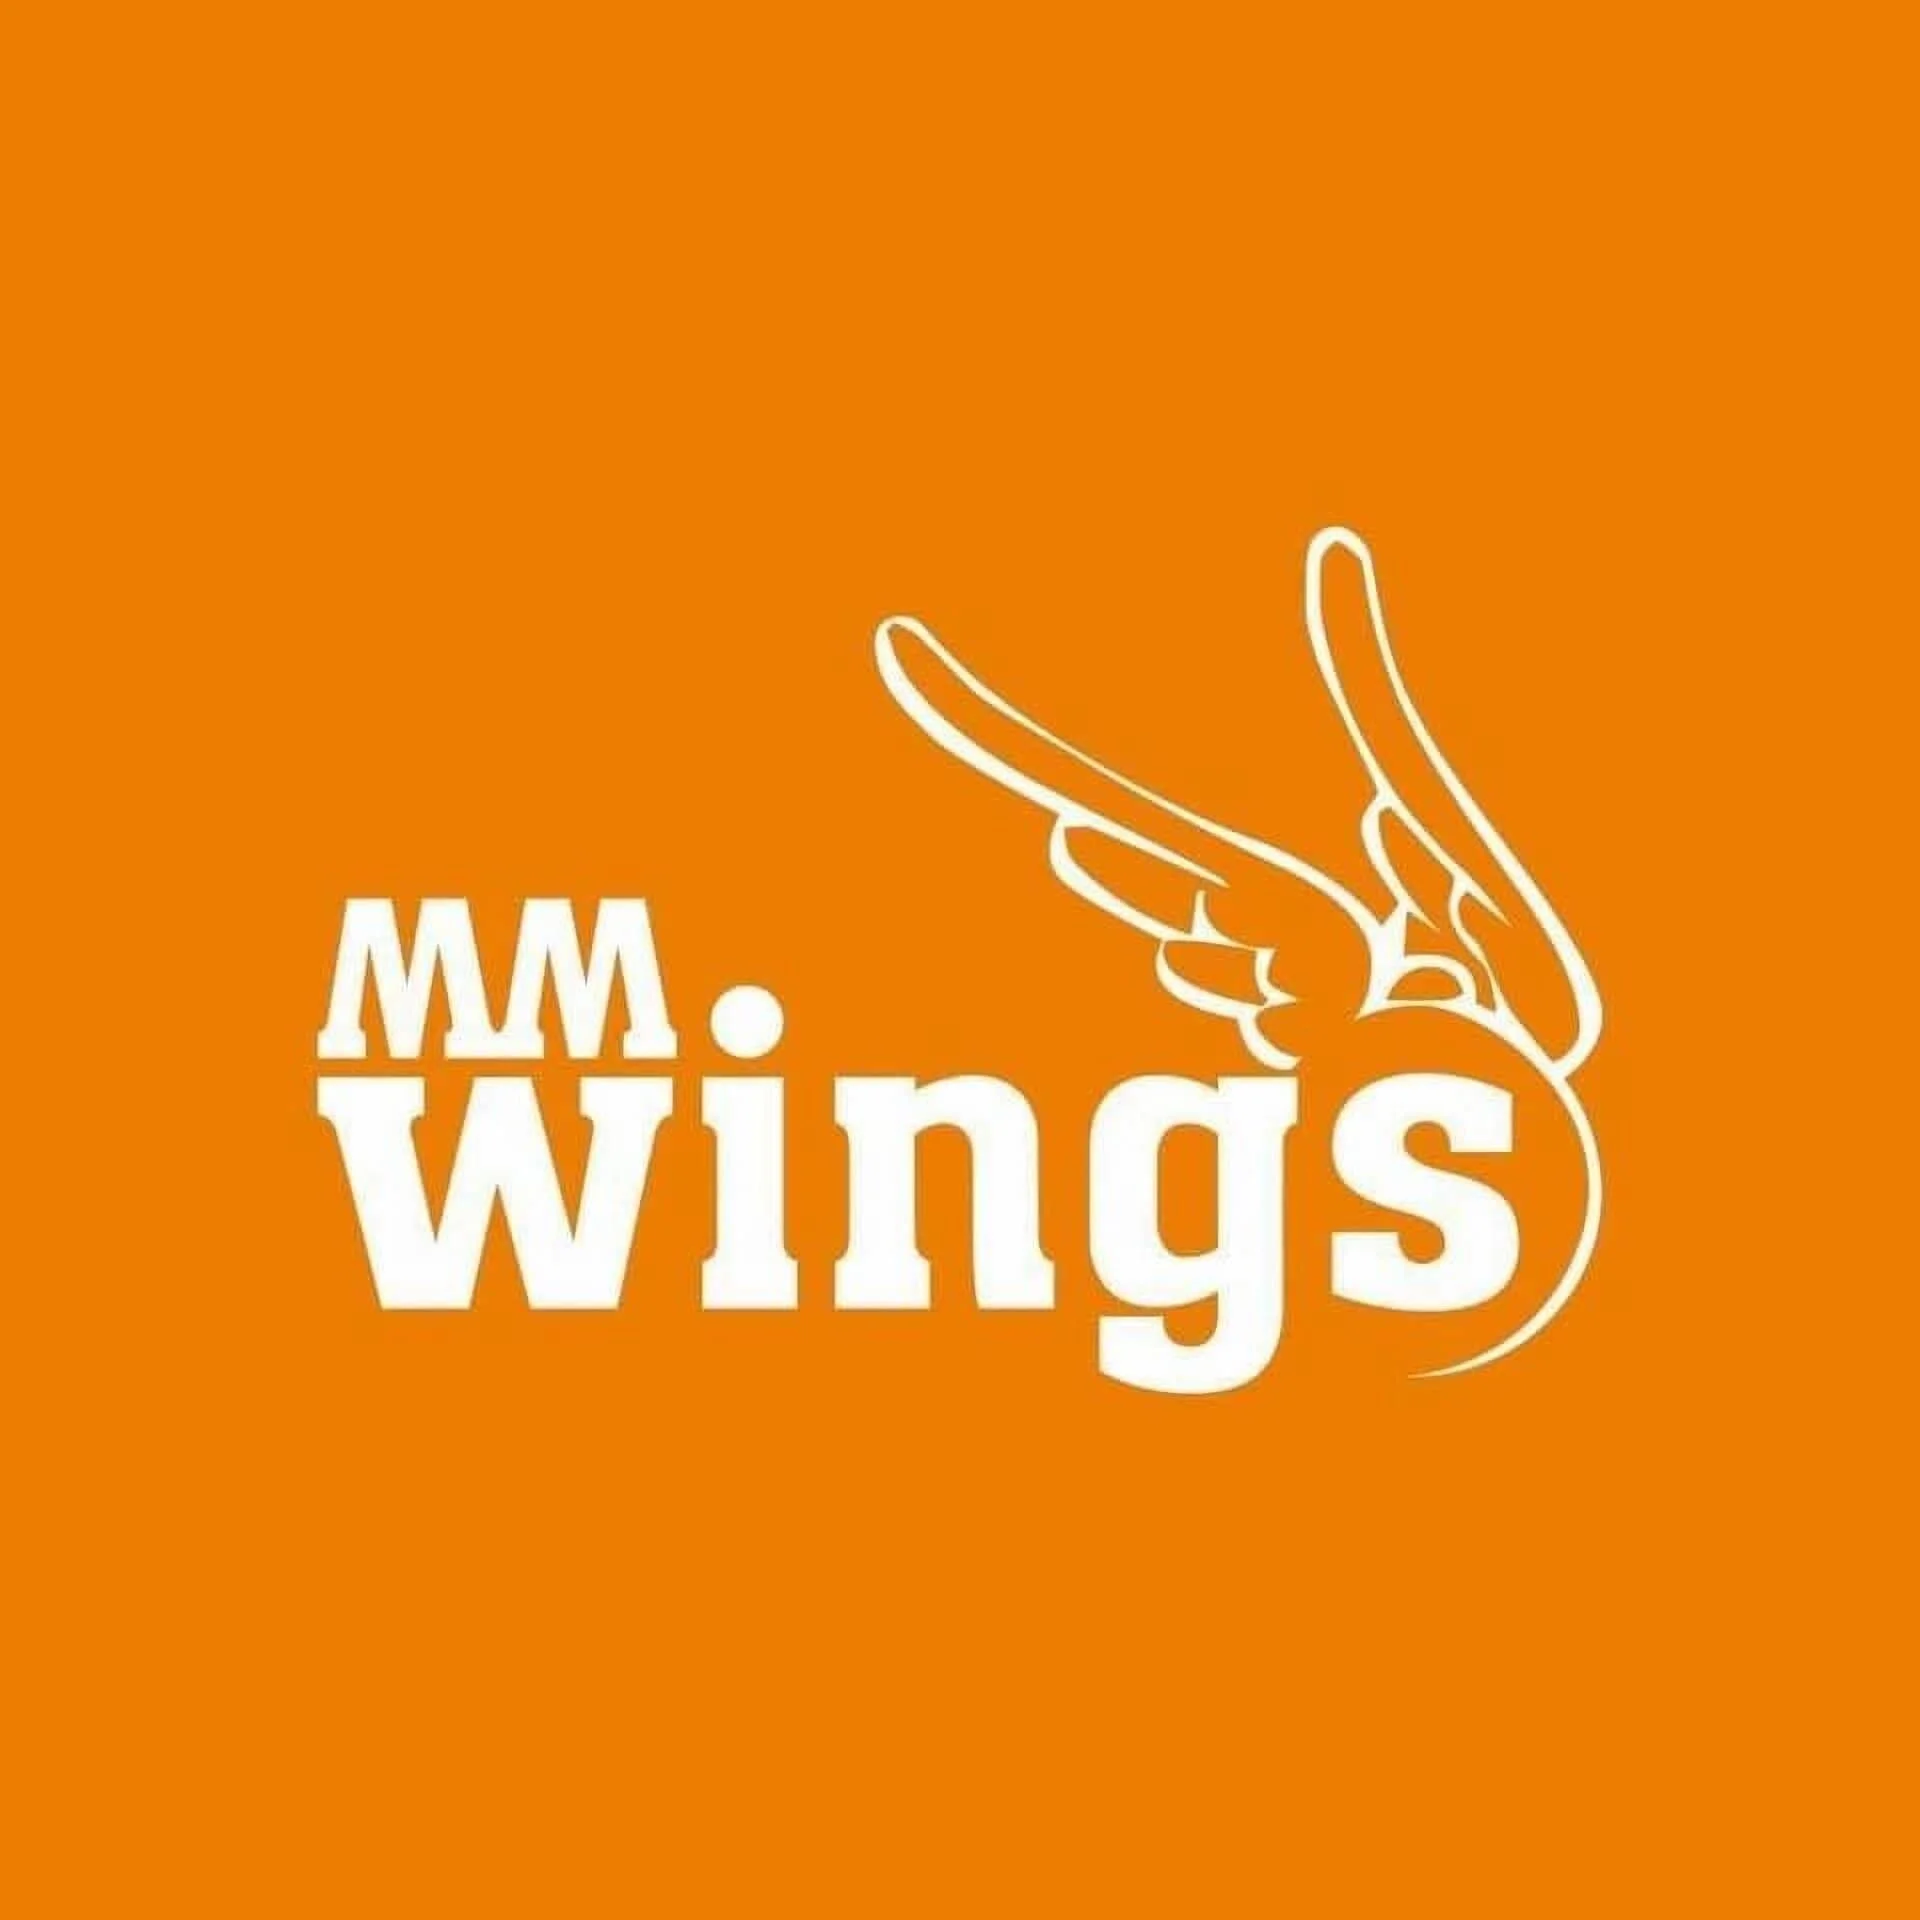 MM Wings(Local Quis Quis)-4442